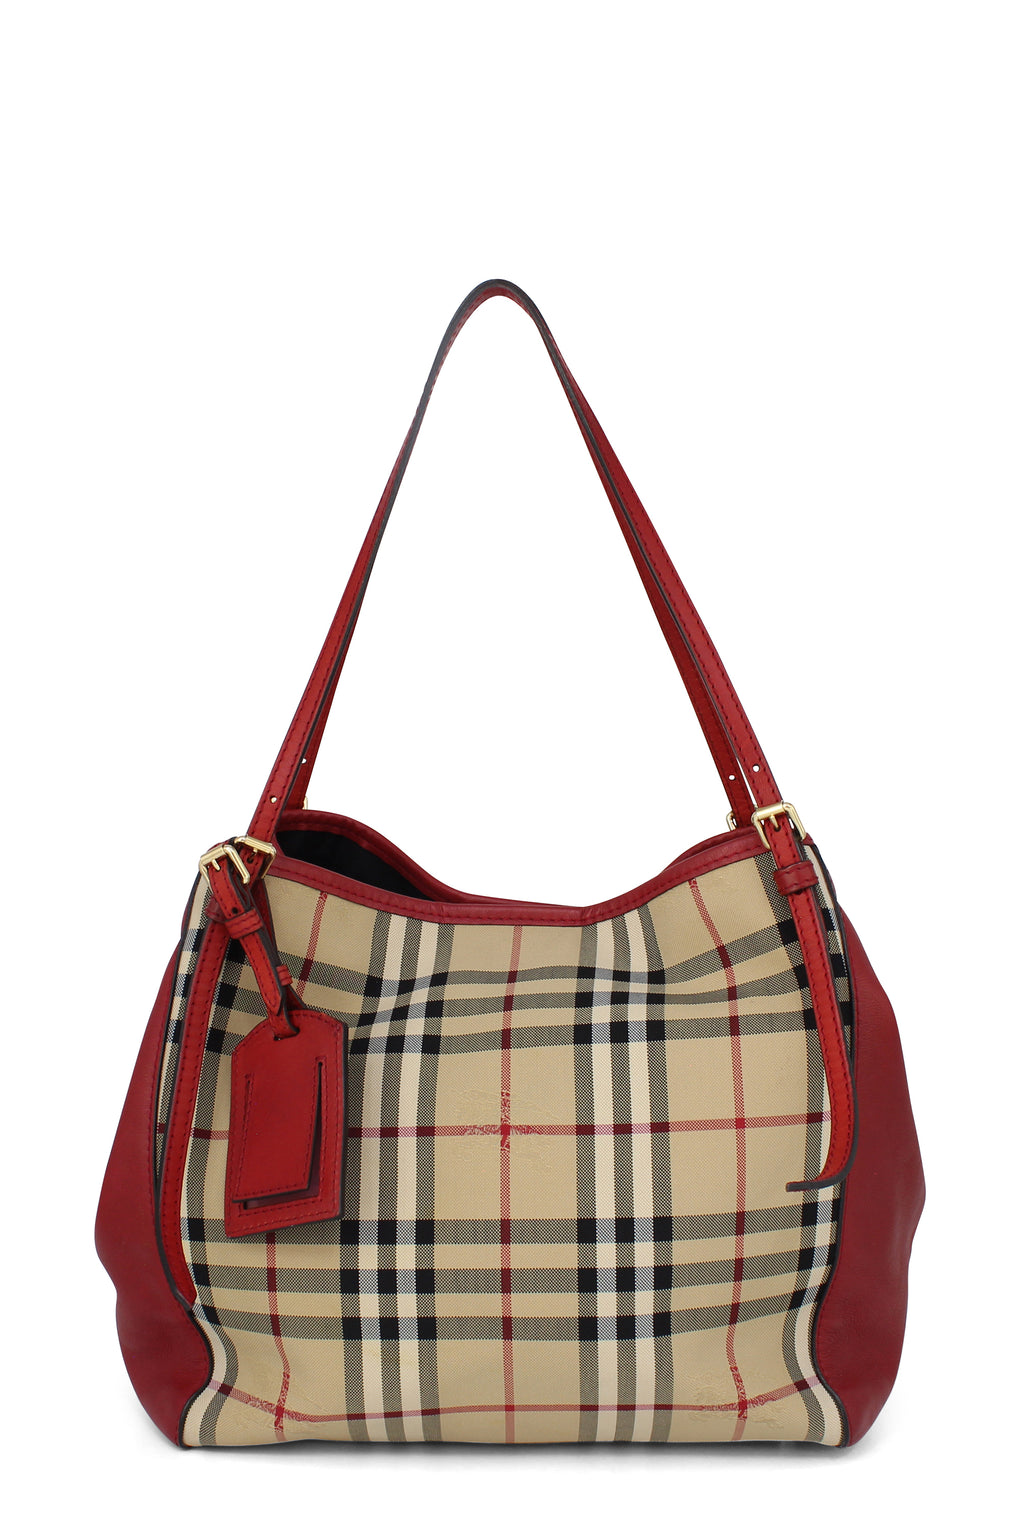 burberry horseferry tote